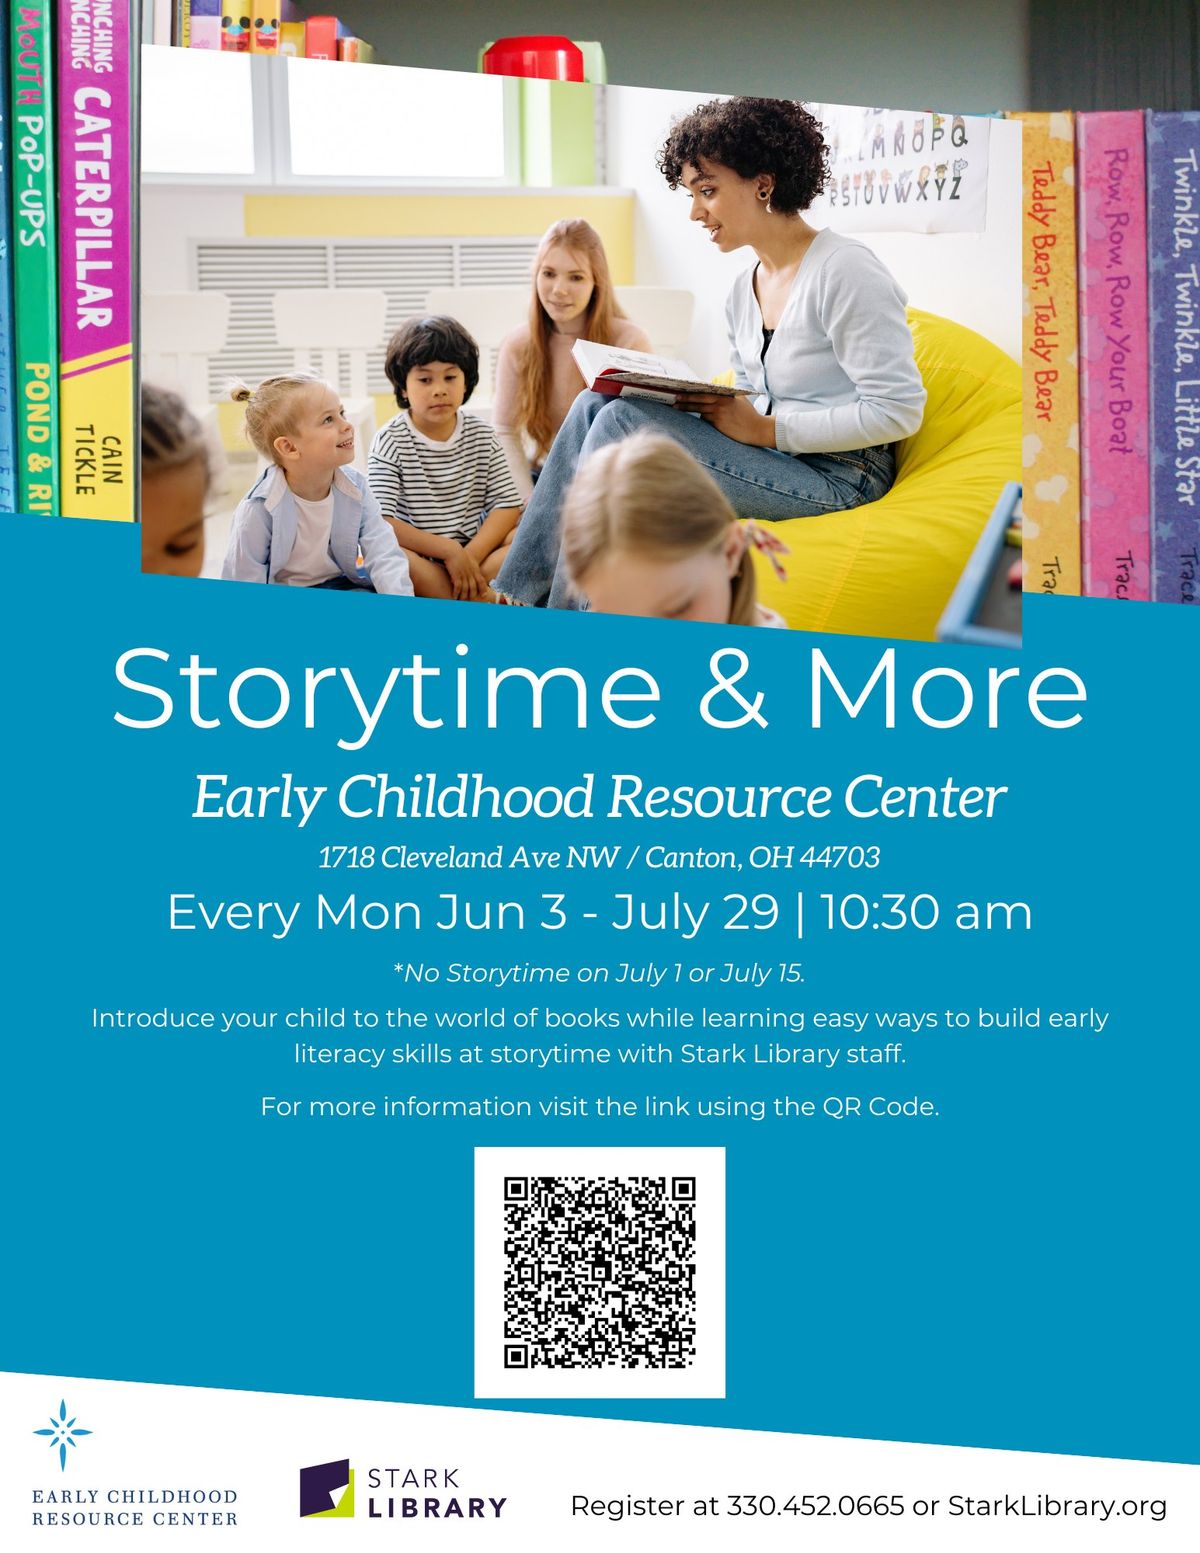 Storytime Series at the Early Childhood Resource Center with the Stark Library